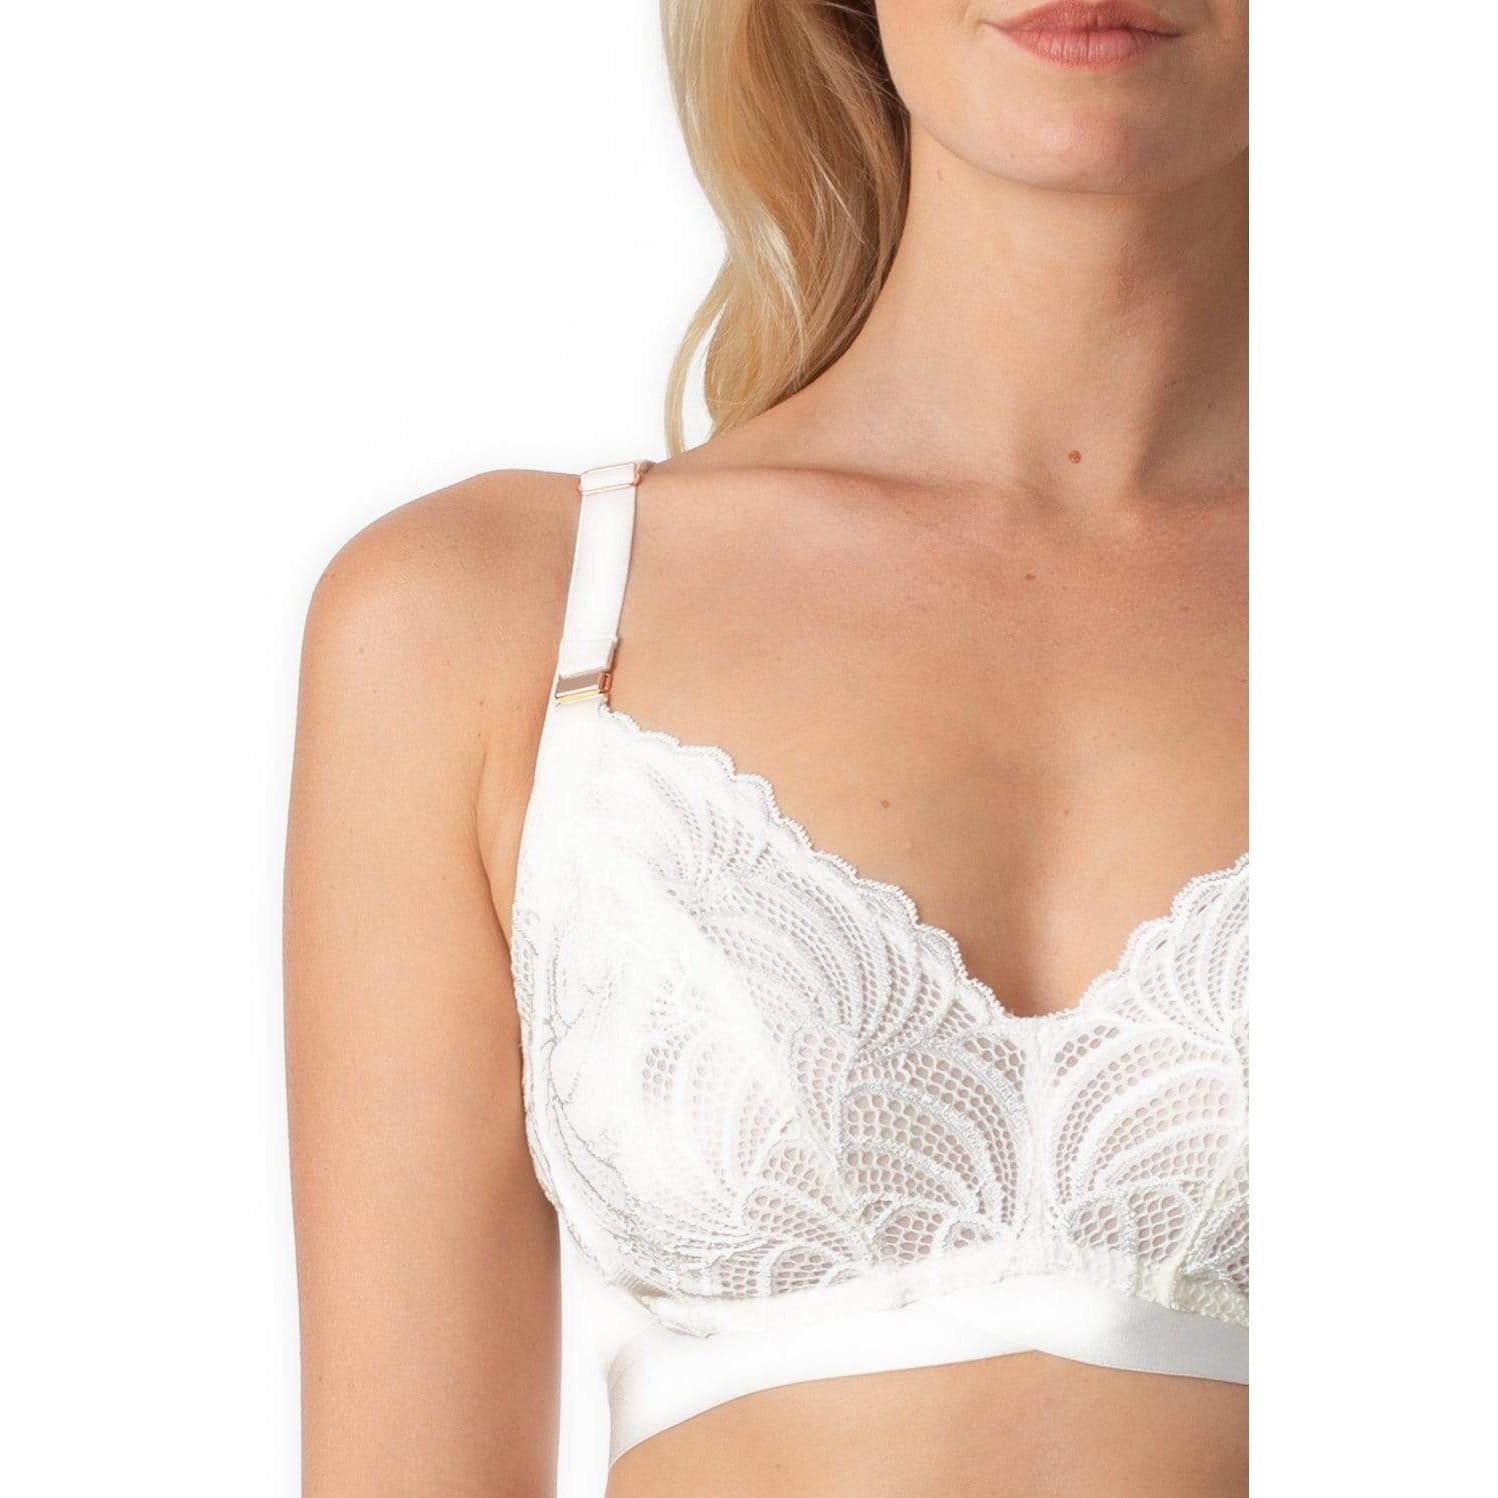 Hot Milk Warrior - Maternity Wirefree Bra  Available at Illusions Lingerie